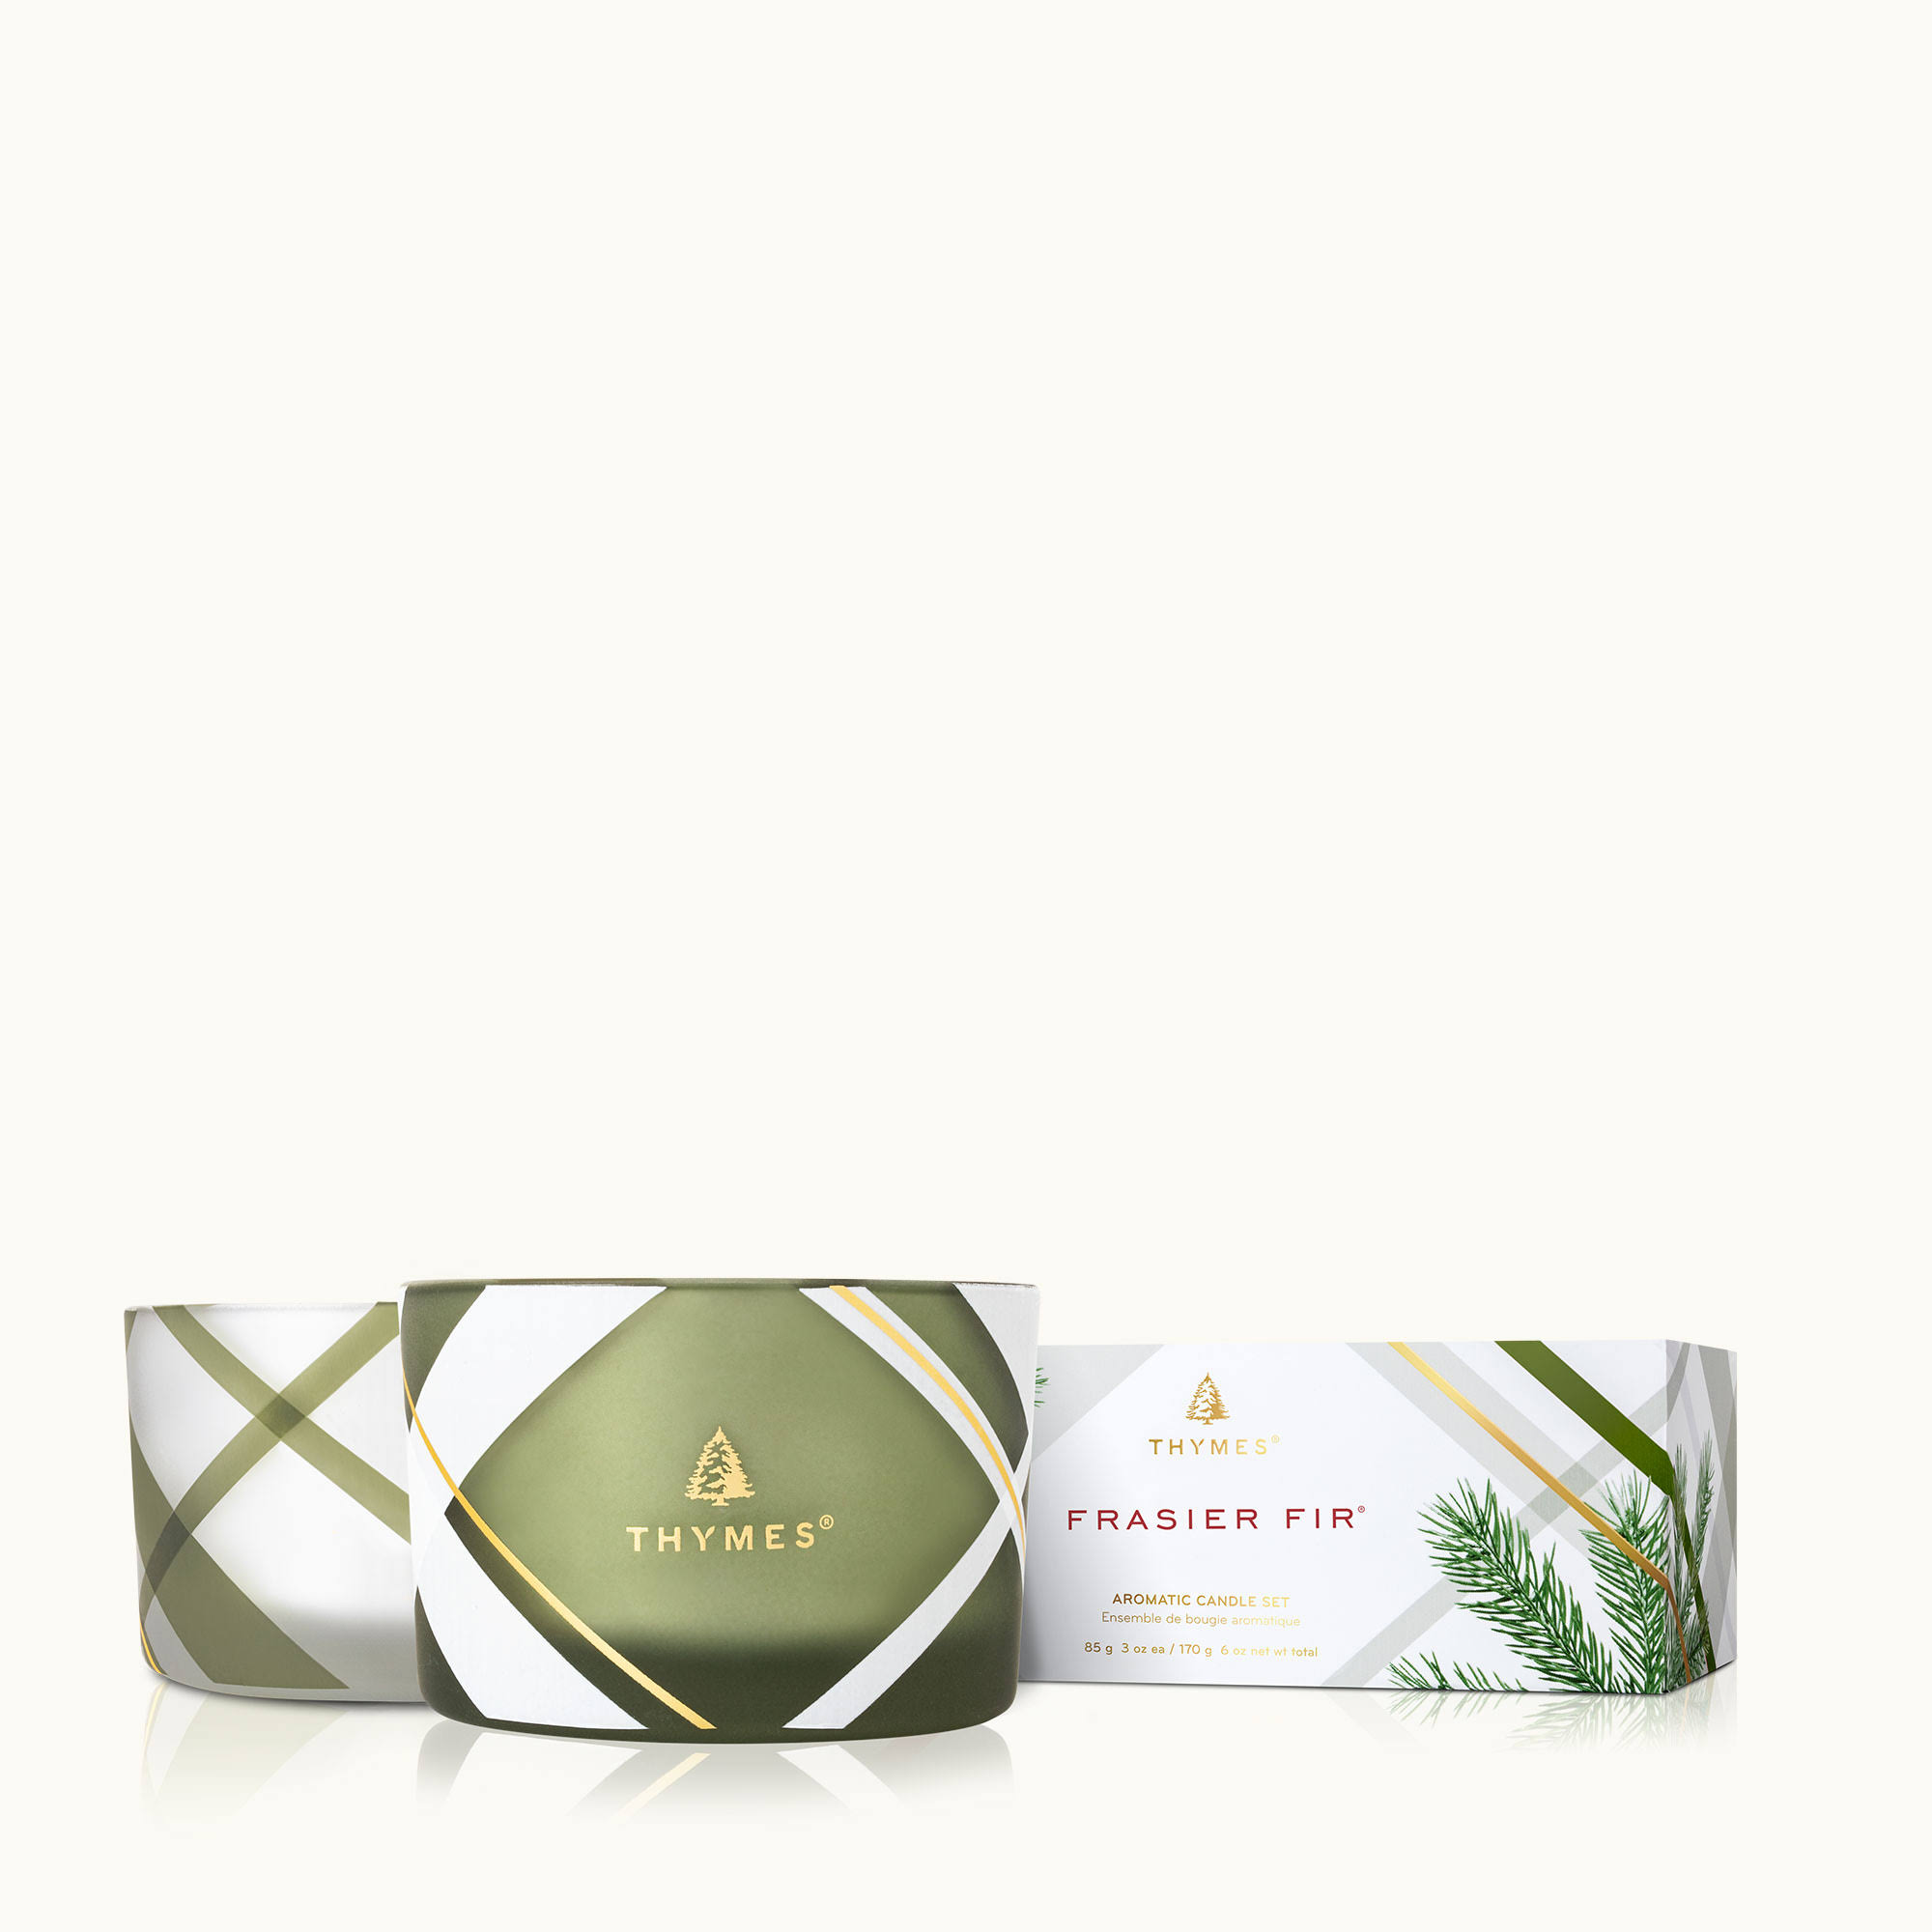 Thymes Frasier Fir Frosted Plaid Candle Set